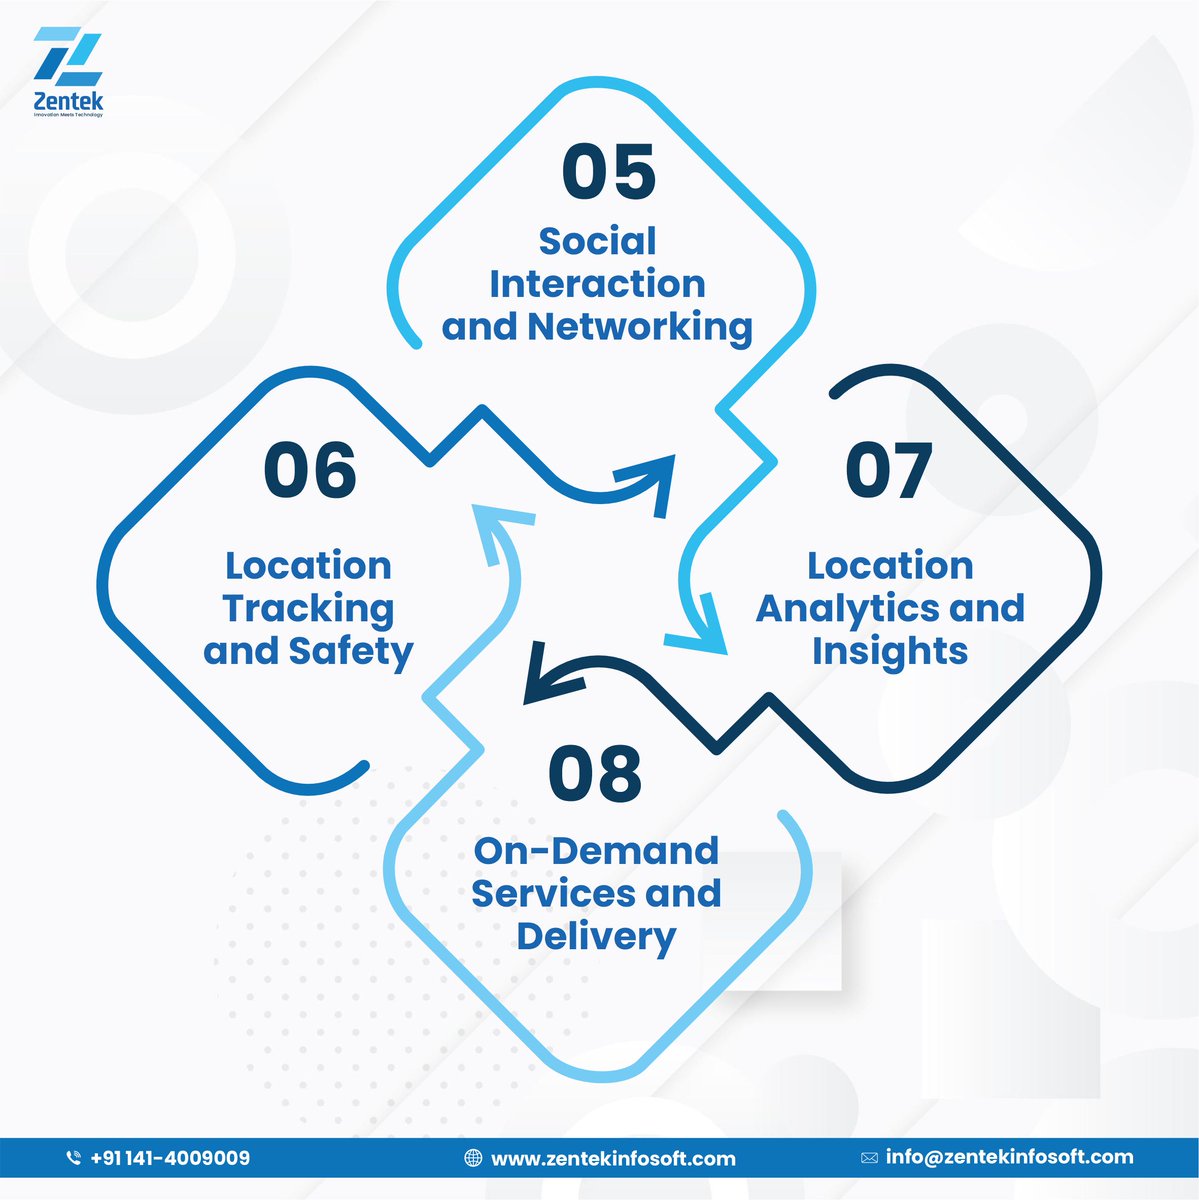 By leveraging the power of location, you can offer #personalizedfeatures, real-time information, navigation assistance, geofencing capabilities, social interaction, #locationtracking, safety measures, valuable analytics, and #ondemandservices. 

#RealTimeInformation #Analytics